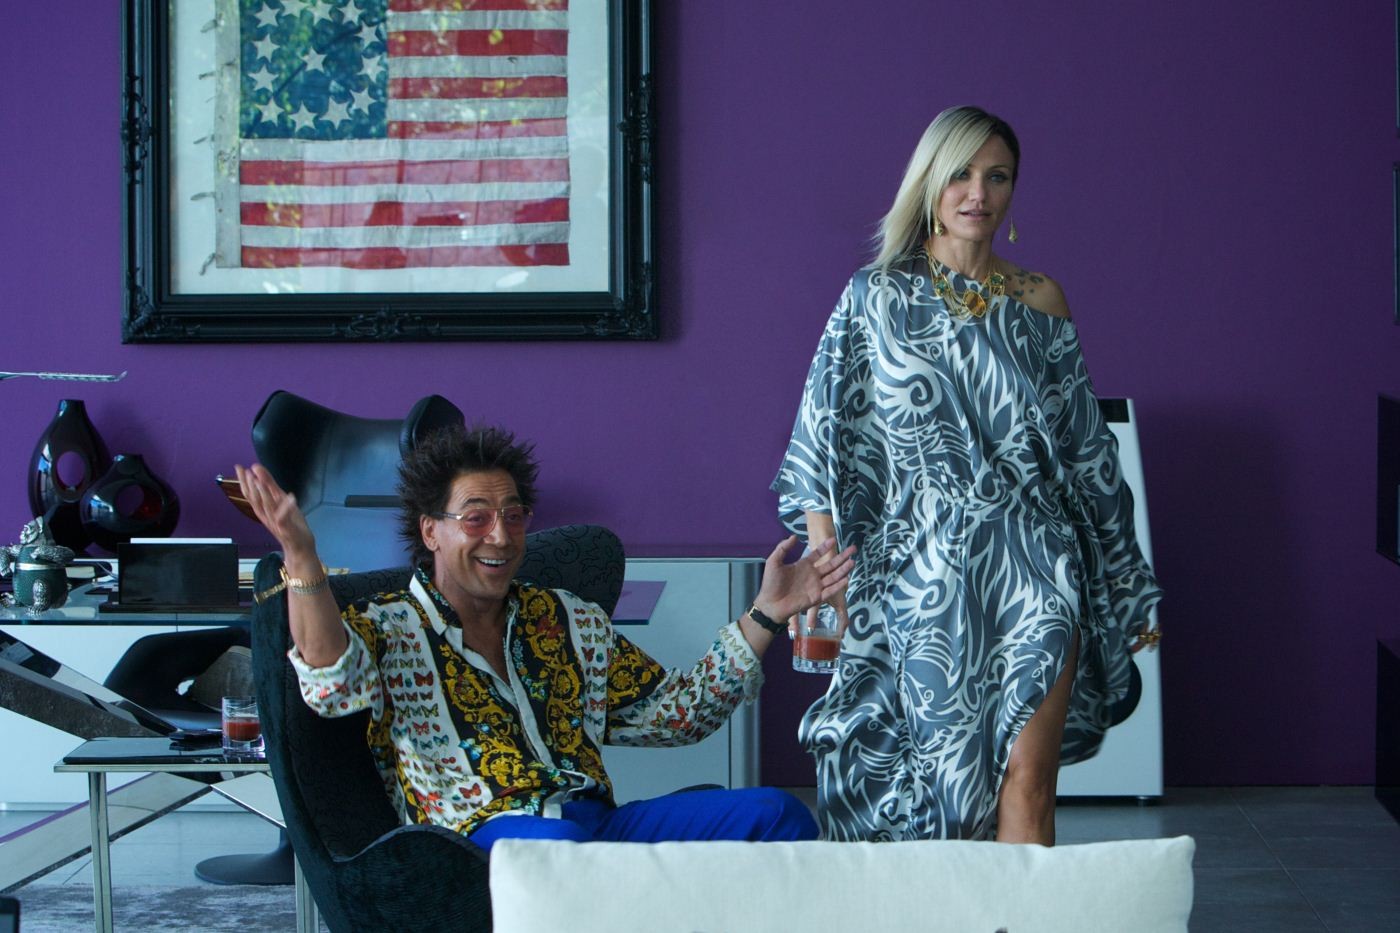 Javier Bardem stars as Reiner and Cameron Diaz stars as Malkina in 20th Century Fox's The Counselor (2013)